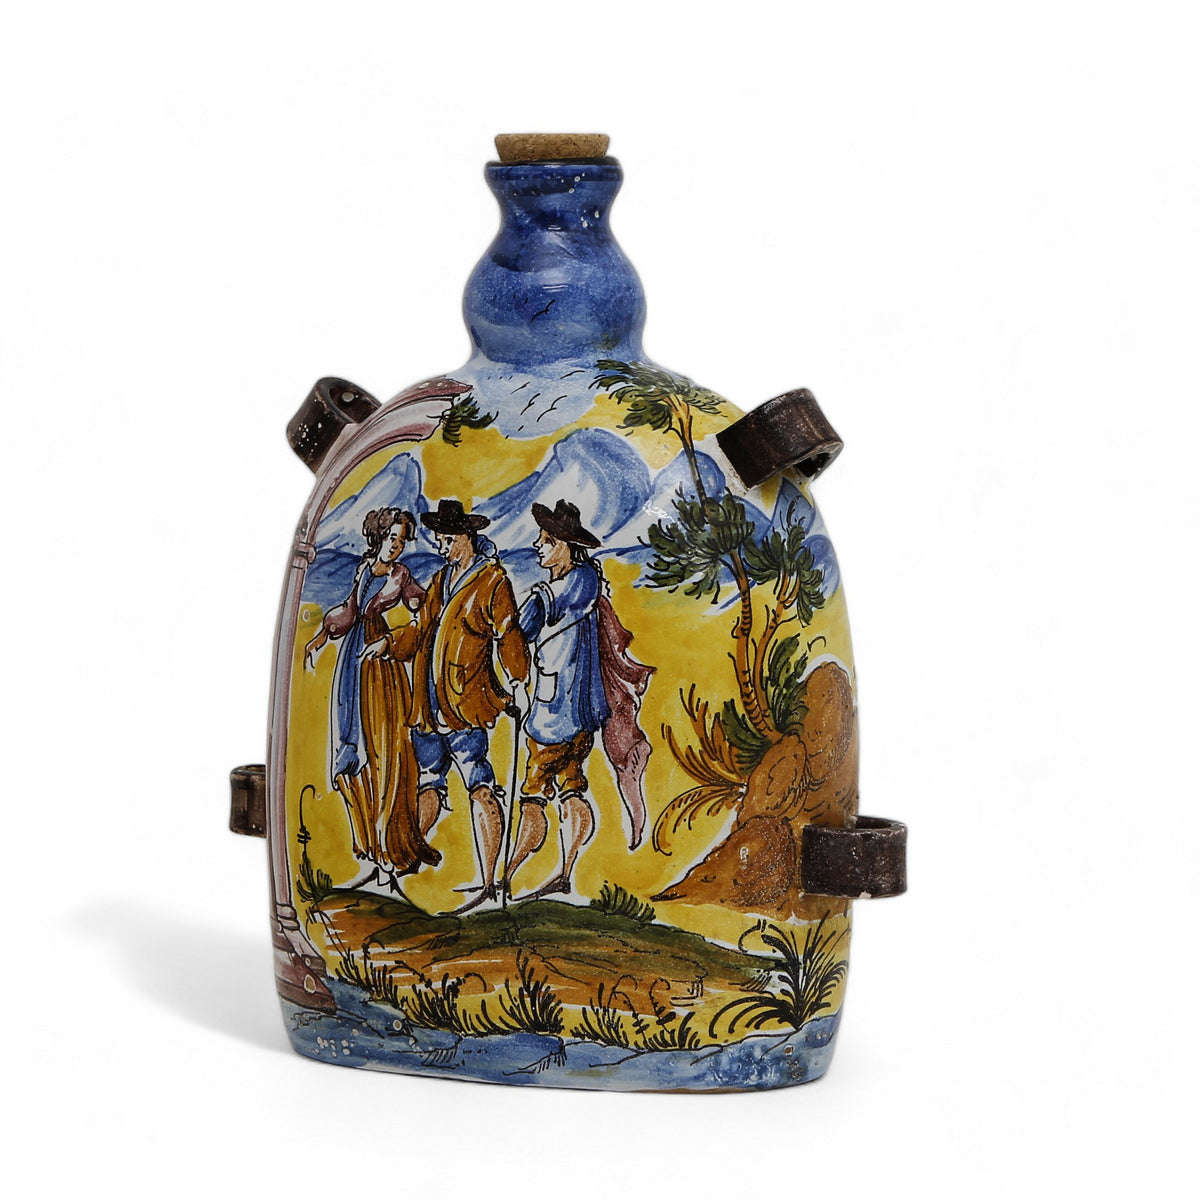 TUSCAN MAJOLICA: Old World Tuscan Flask depicting Renaissance farmers vignette with four handles and cork.